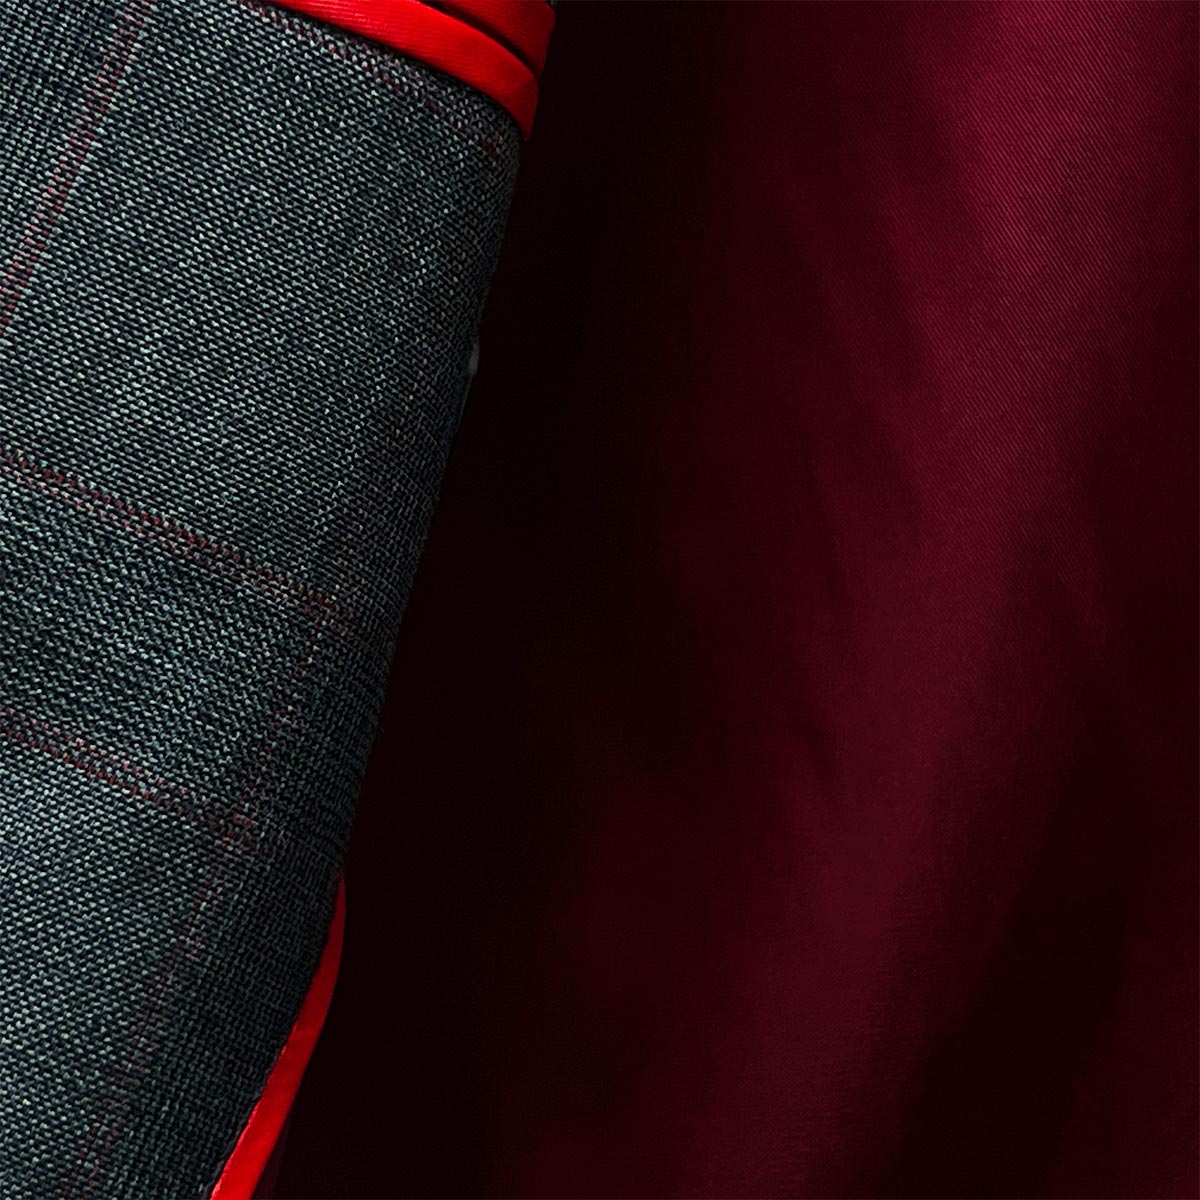 Pocket square detail on a men's grey windowpane suit, adding a touch of classic sophistication.